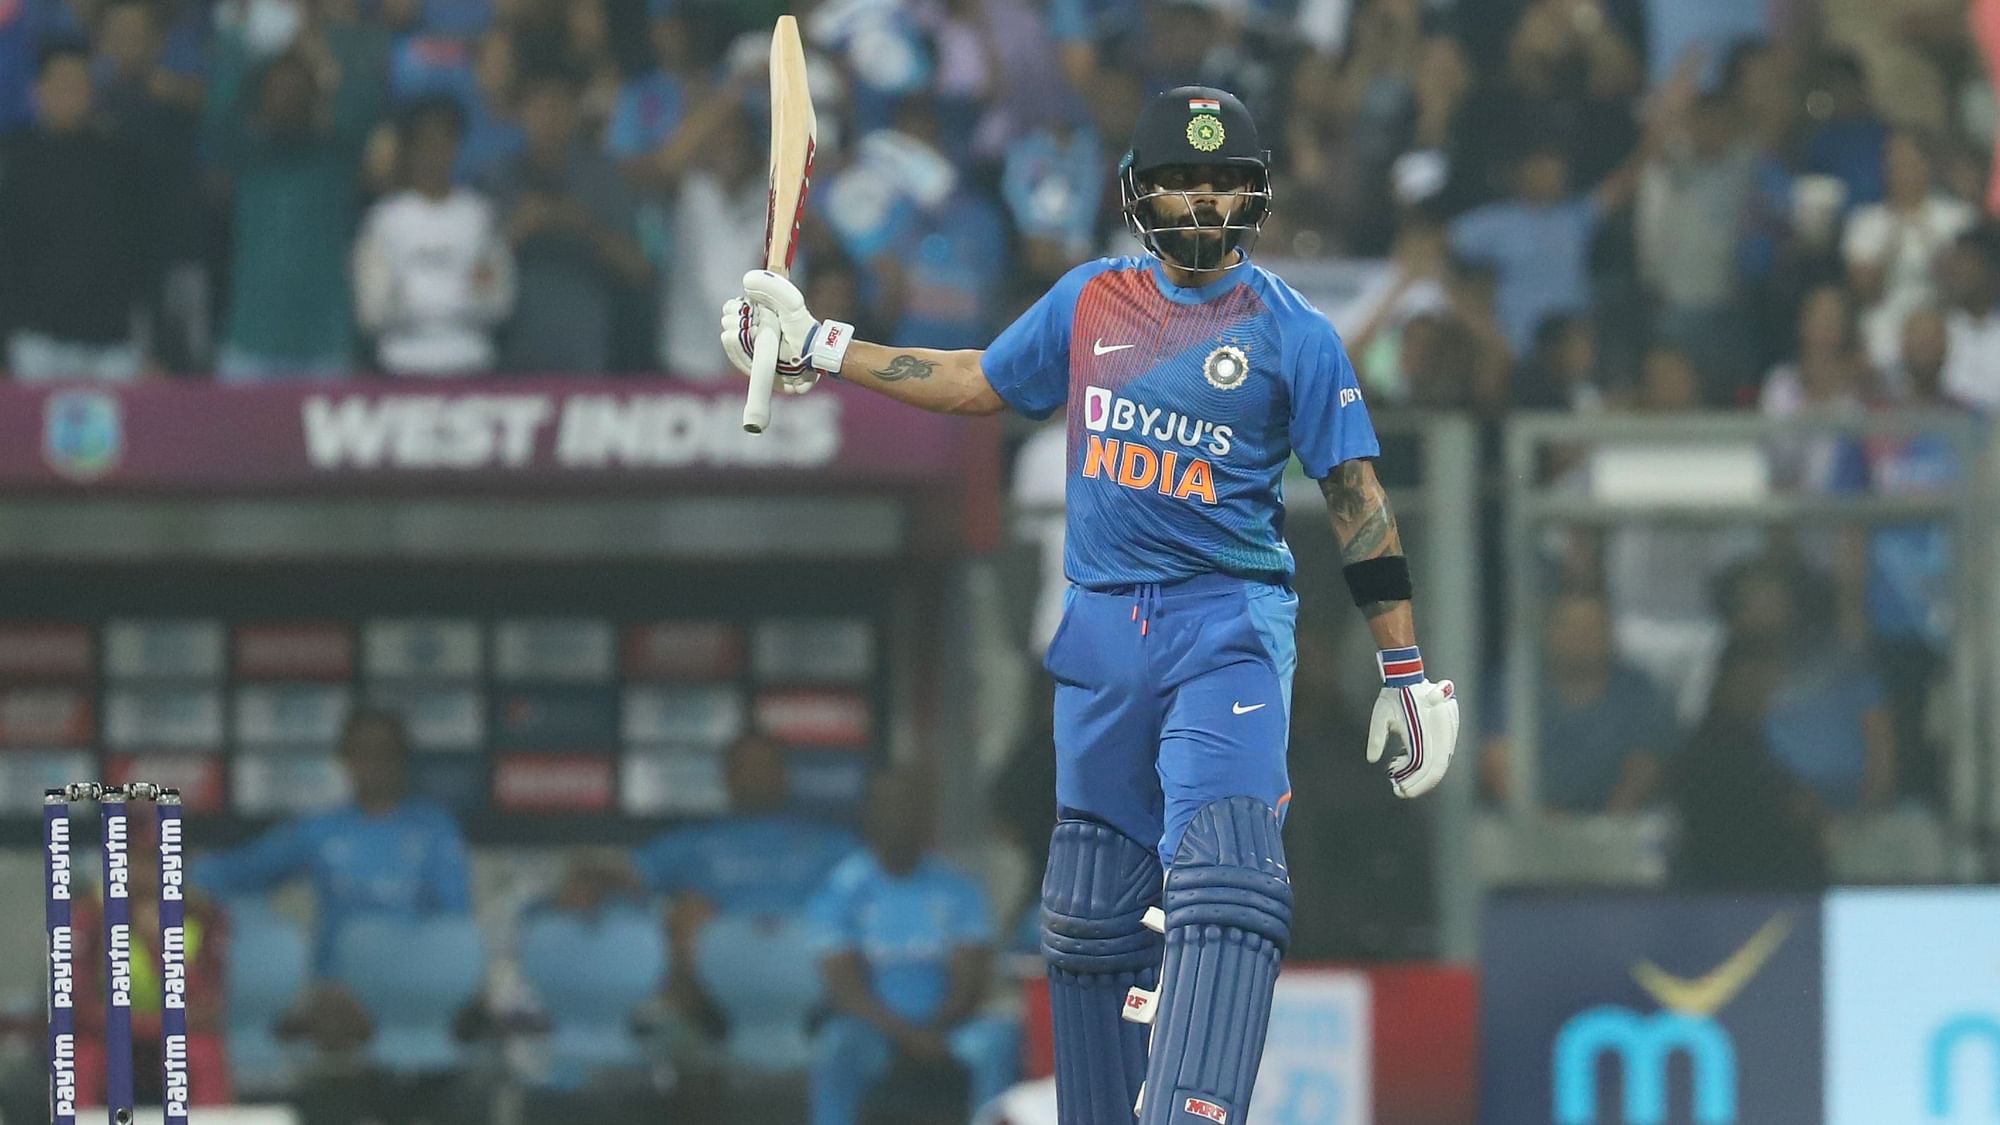  Kohli had seven sixes in his 29-ball-70 as India beat West Indies by 67 runs to win the three-match T20 series 2-1.